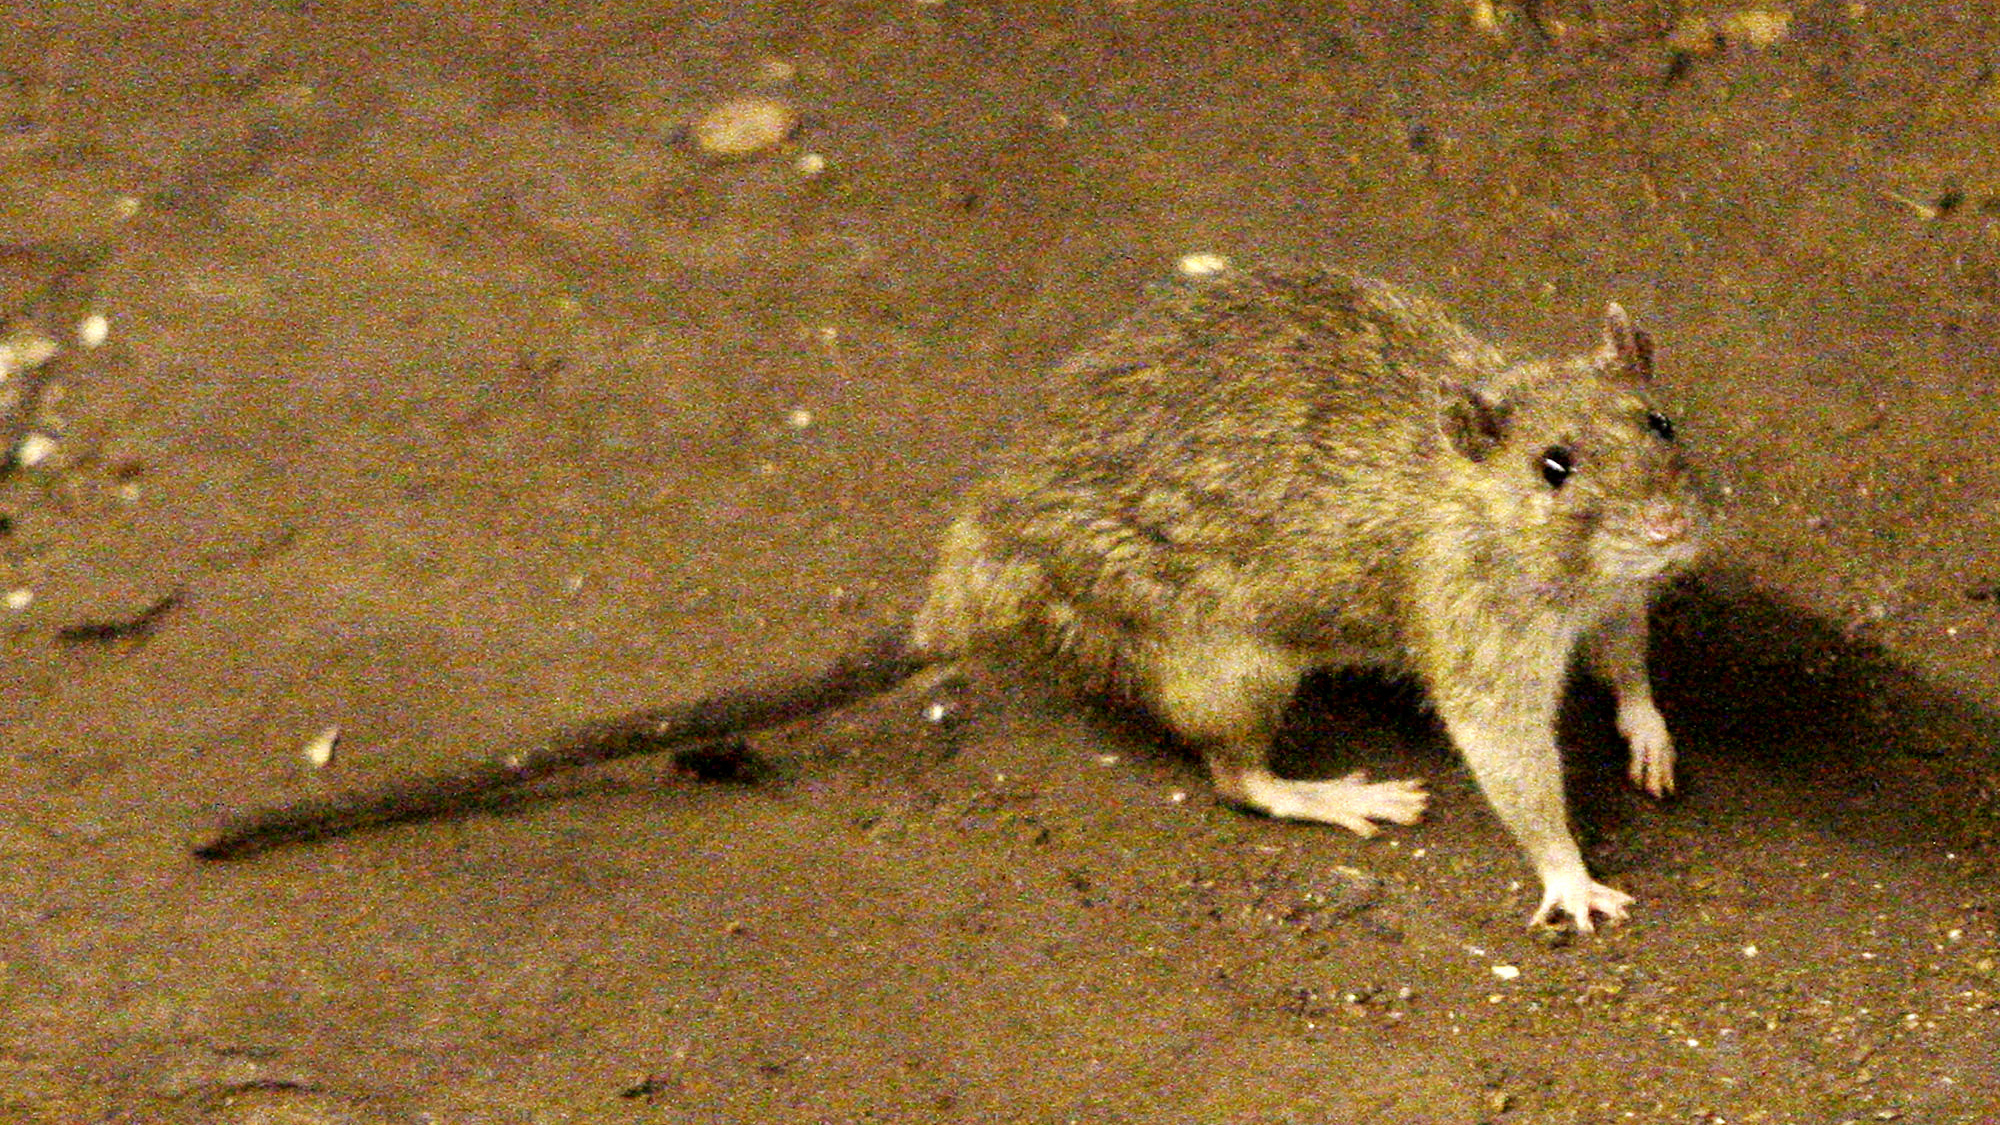 Pizza? Meh -- This Rat Dragged an Avocado on Subway Tracks